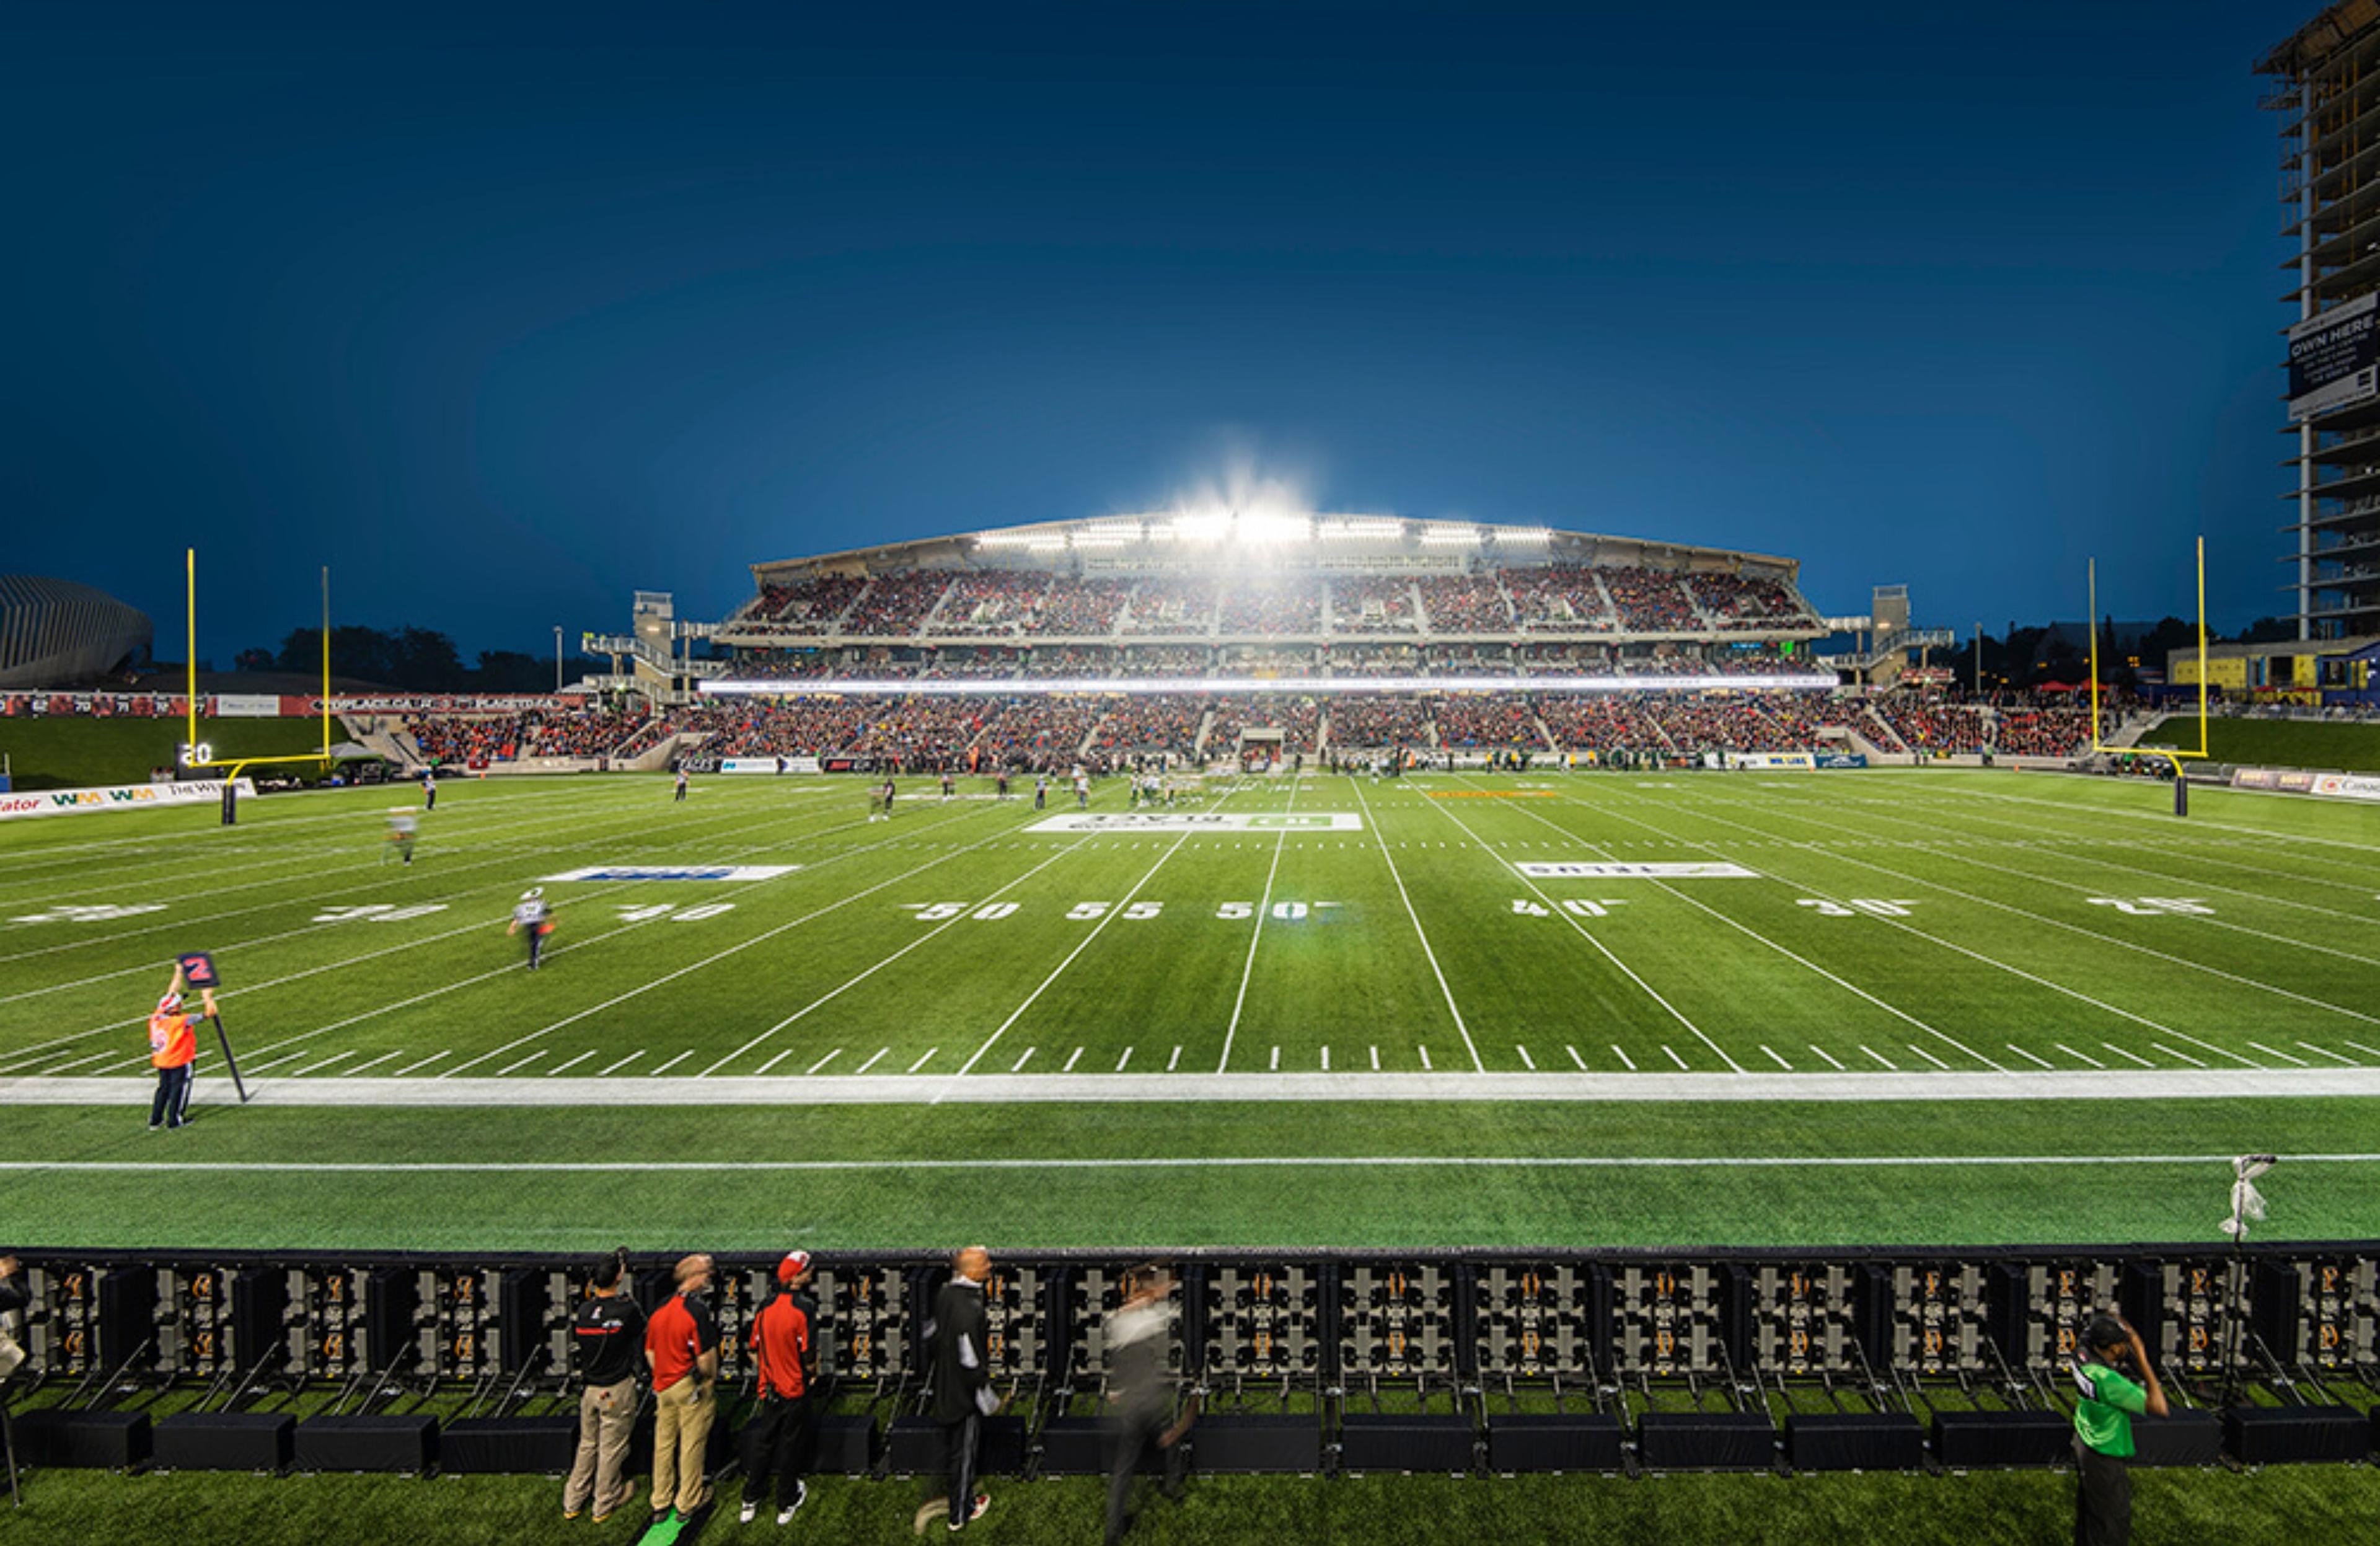 TD Place